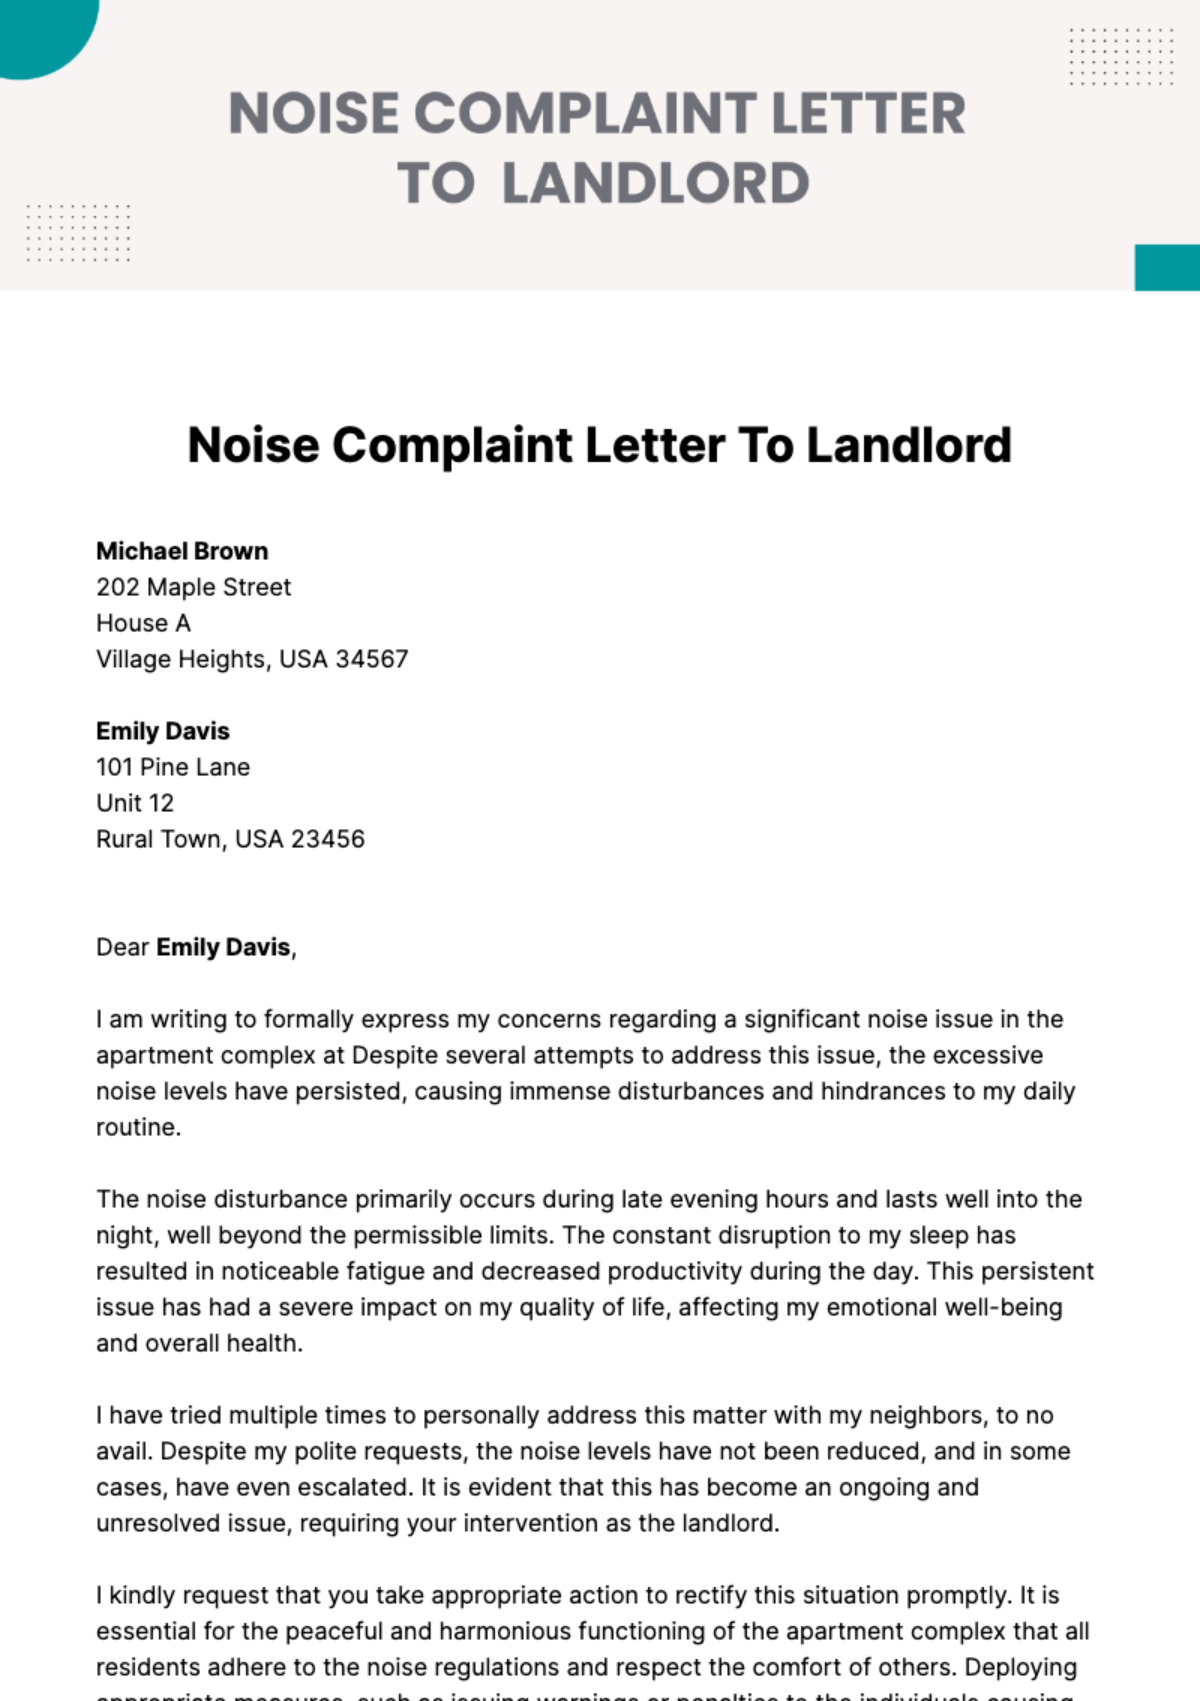 Free Noise Complaint Letter To Landlord Template